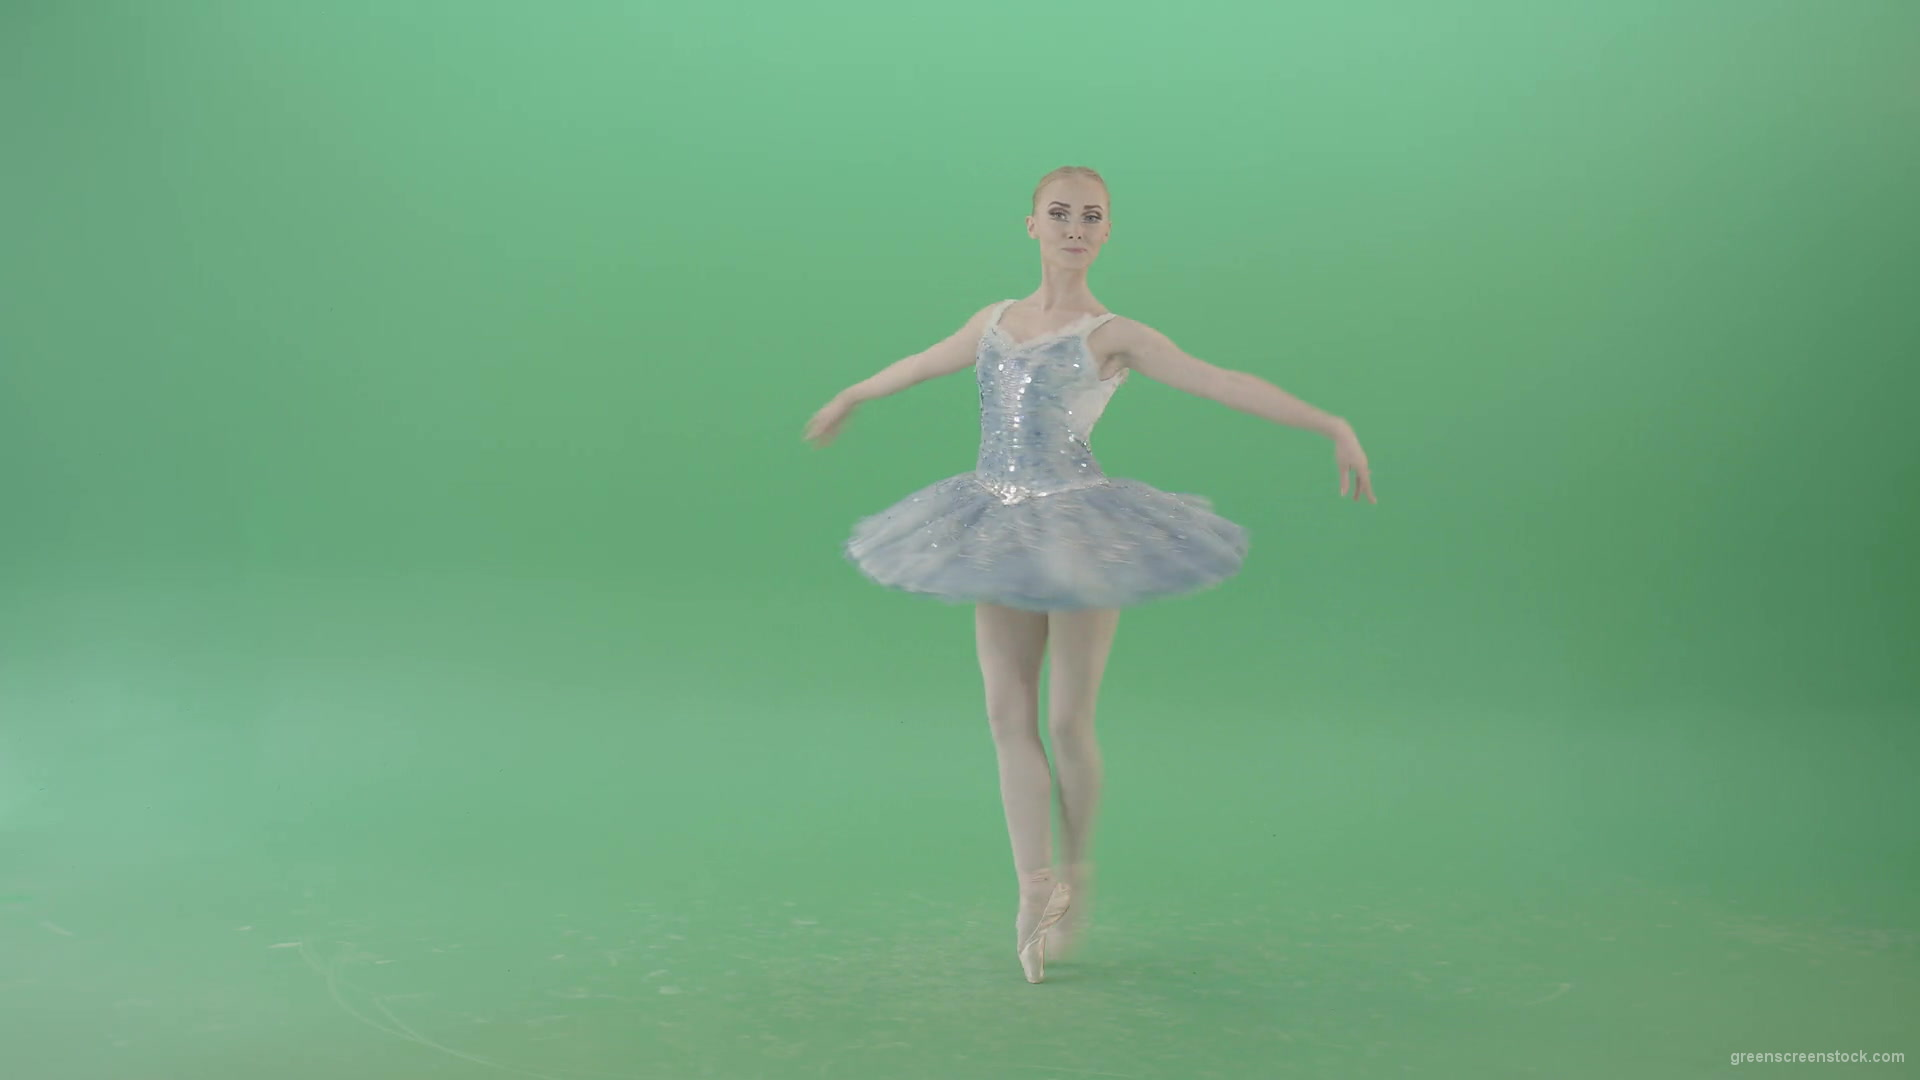 Beauty-blonde-girl-with-happy-smile-spinning-in-ballet-dress-over-green-screen-4K-Video-Footage-1920_005 Green Screen Stock